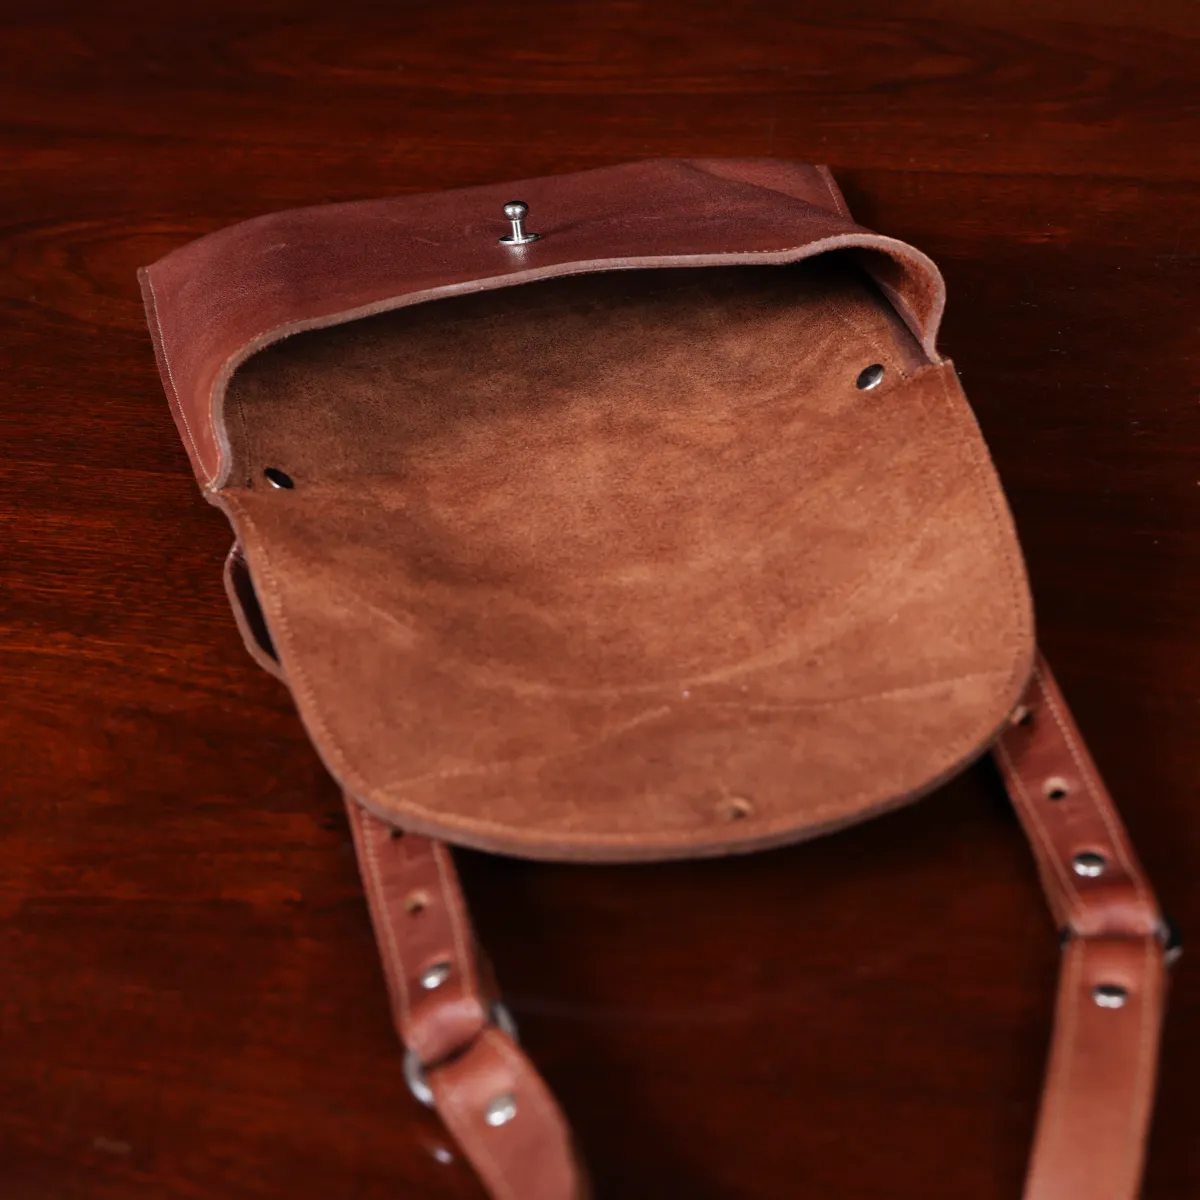 No. 22B Derby Handbag in Vintage Brown on a wood table with a dark background - open view